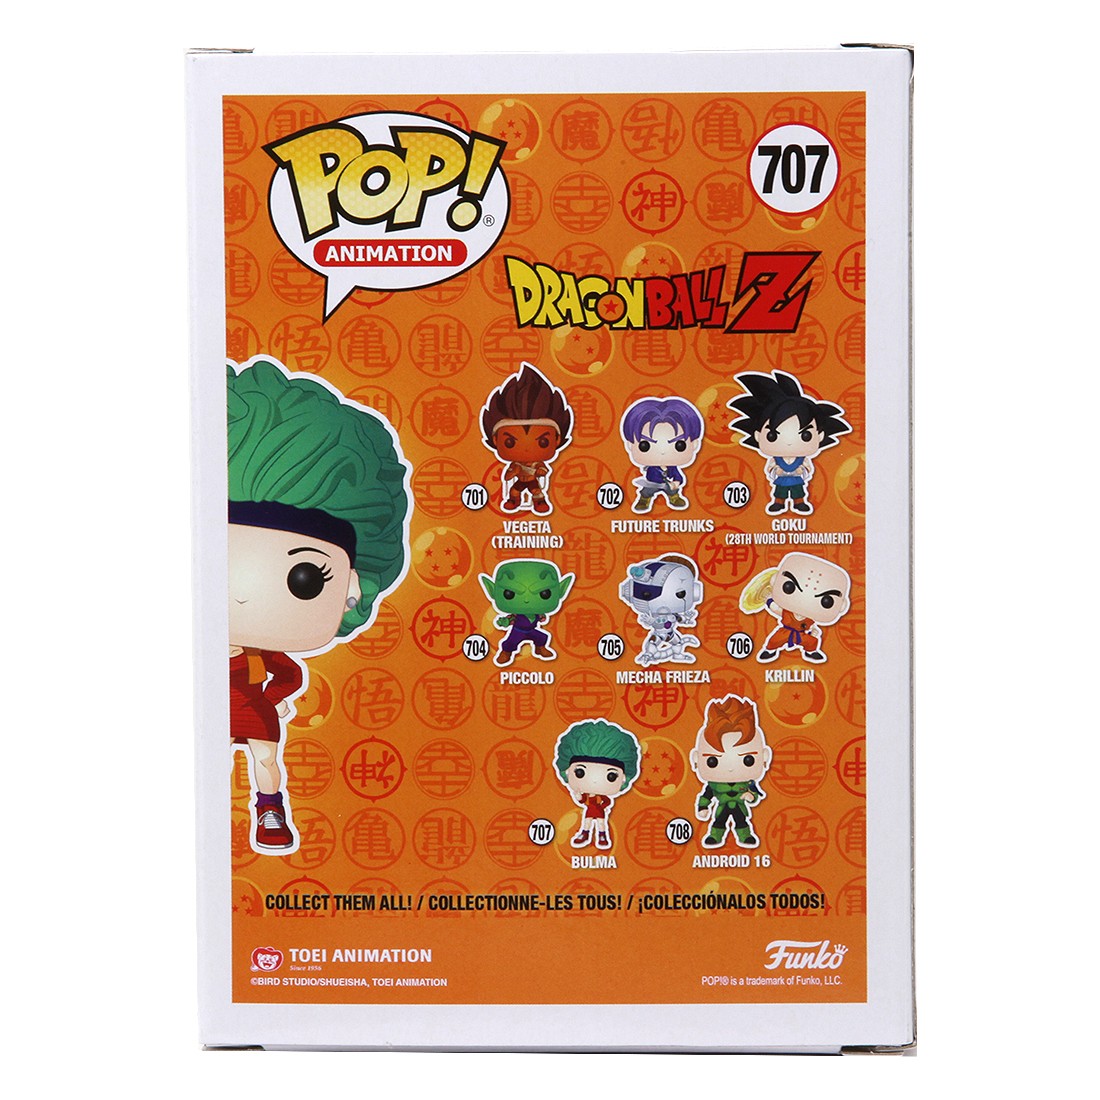 Funko POP Animation Dragon Ball Z Android 16 green